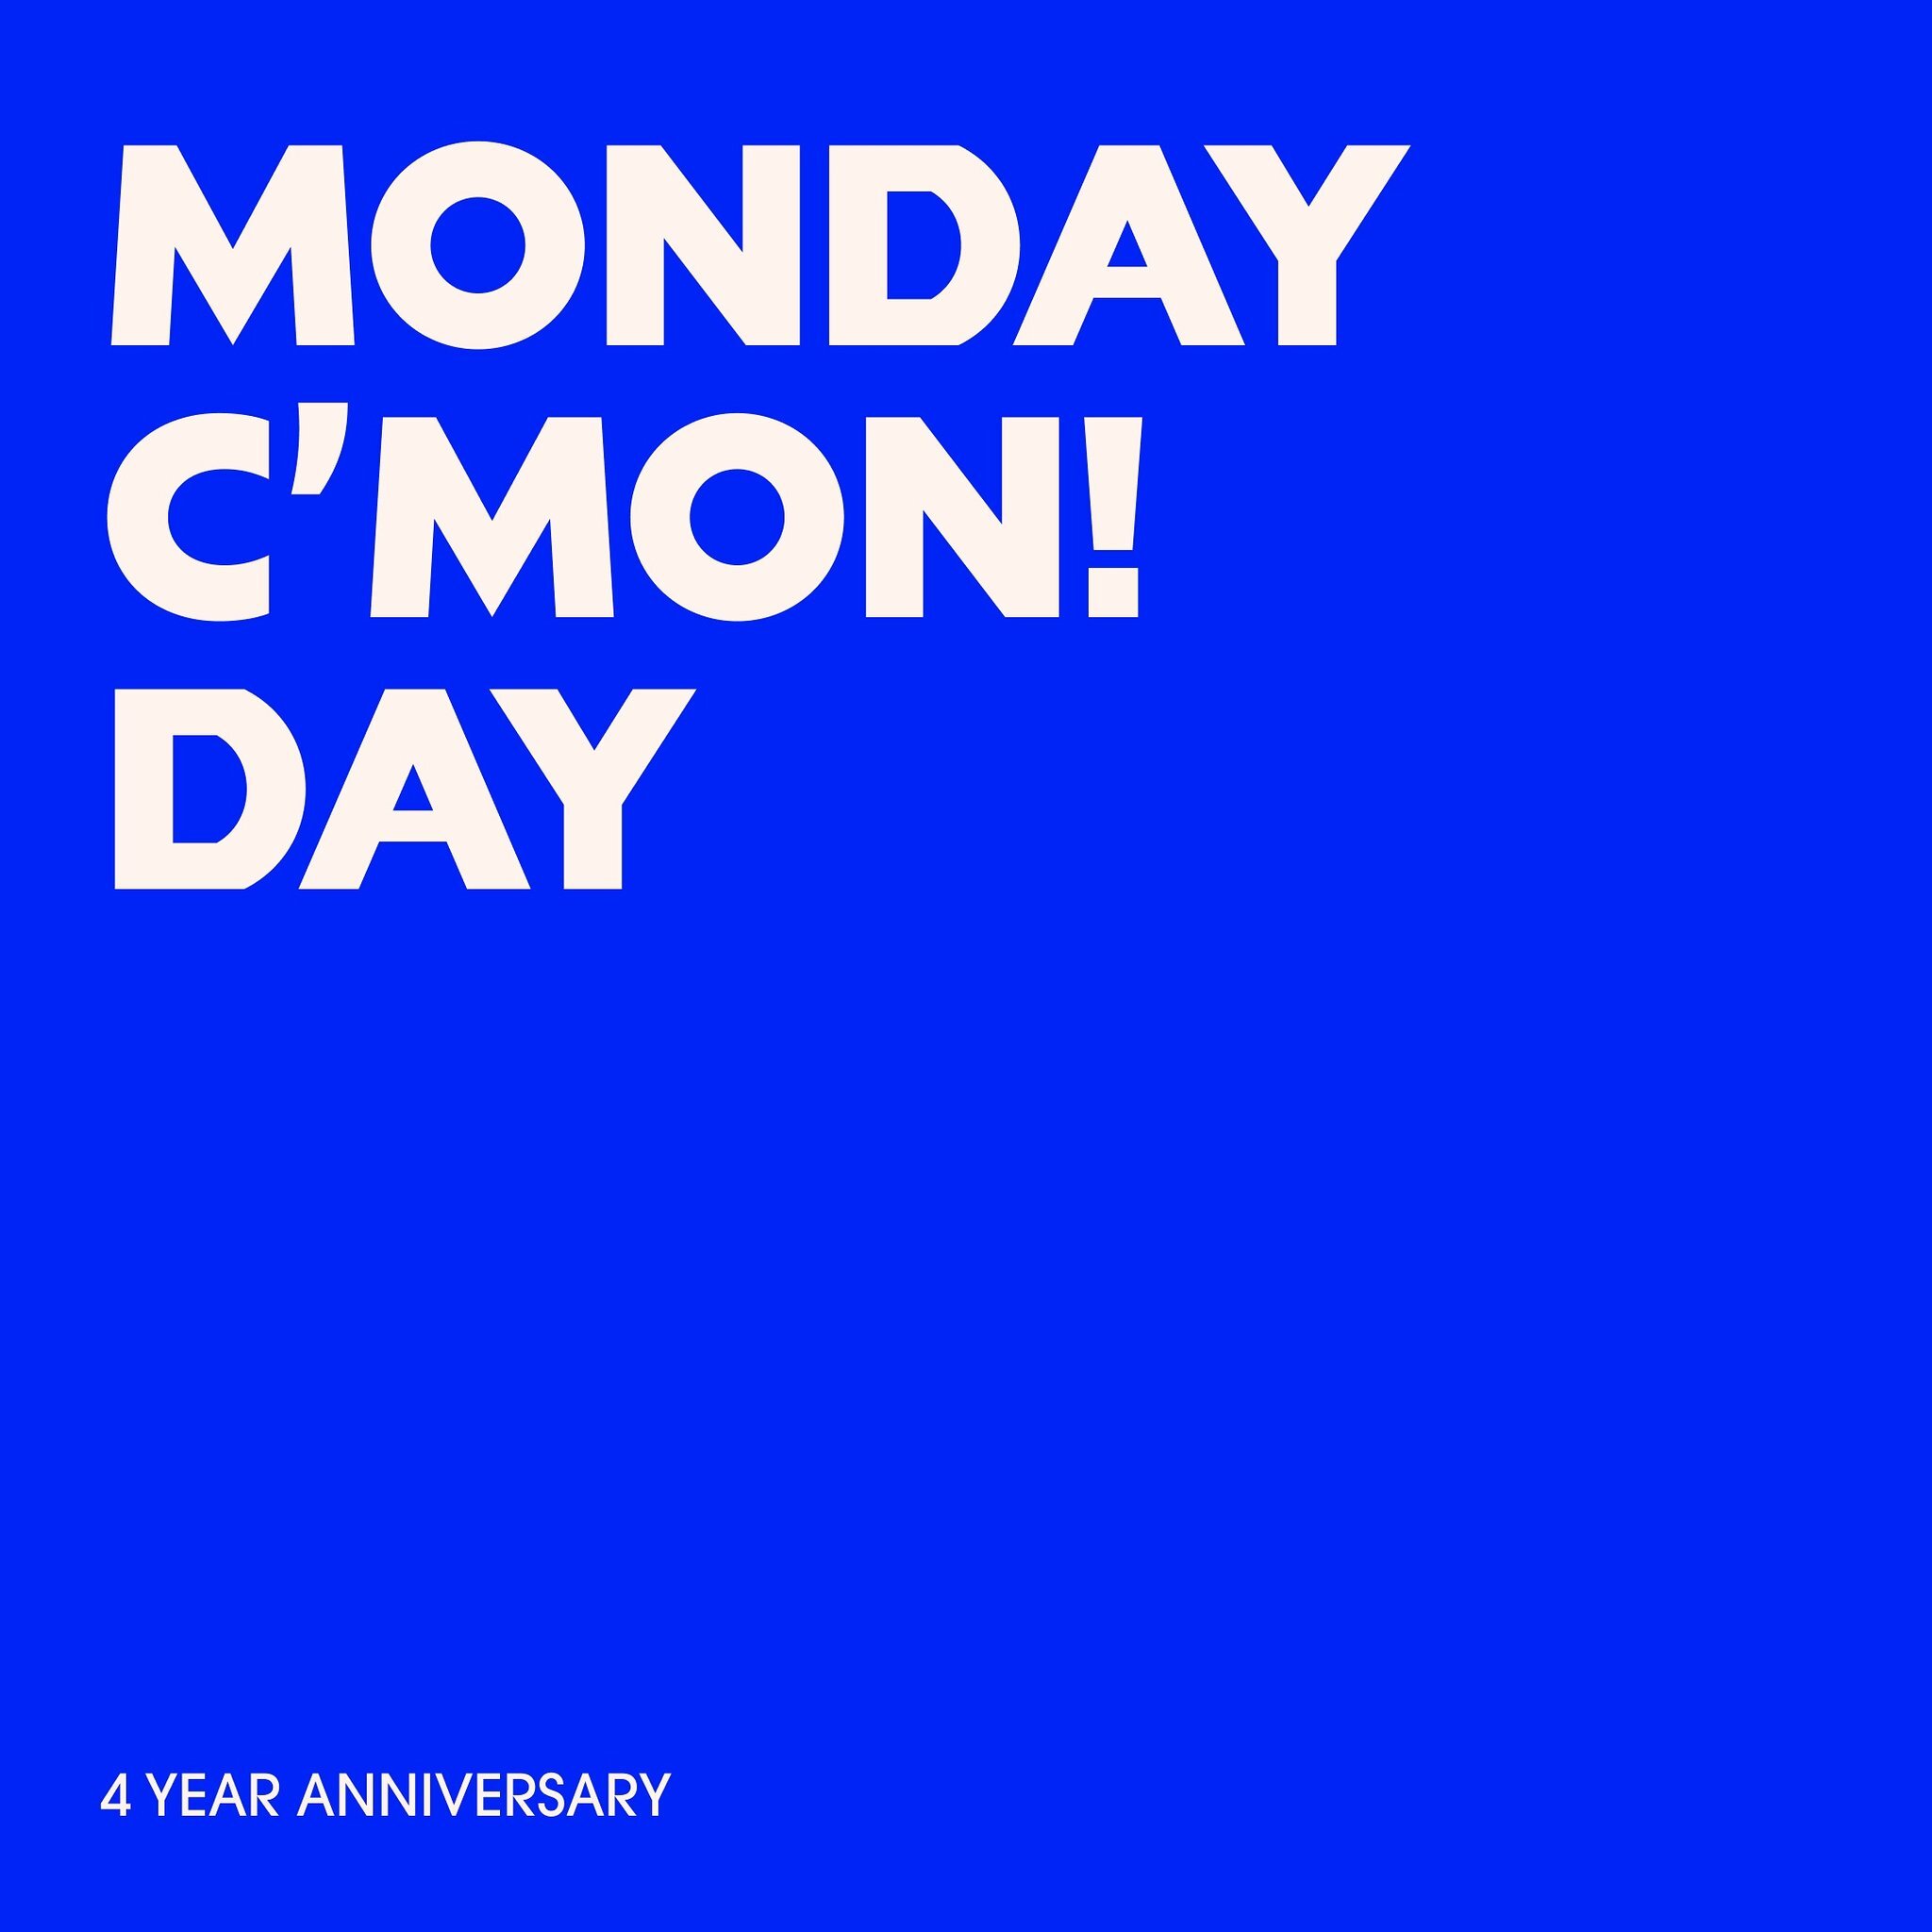 4 years later, it&rsquo;s happy C&rsquo;MON! day on a Monday! A dream come true, meaning I can now introduce my new weekly calendar:

C&rsquo;MON! 
C&rsquo;TUE! 
C&rsquo;WED!
C&rsquo;THU!
C&rsquo;FRI!
C&rsquo;SAT!
C&rsquo;SUN!

&hellip; So now that I